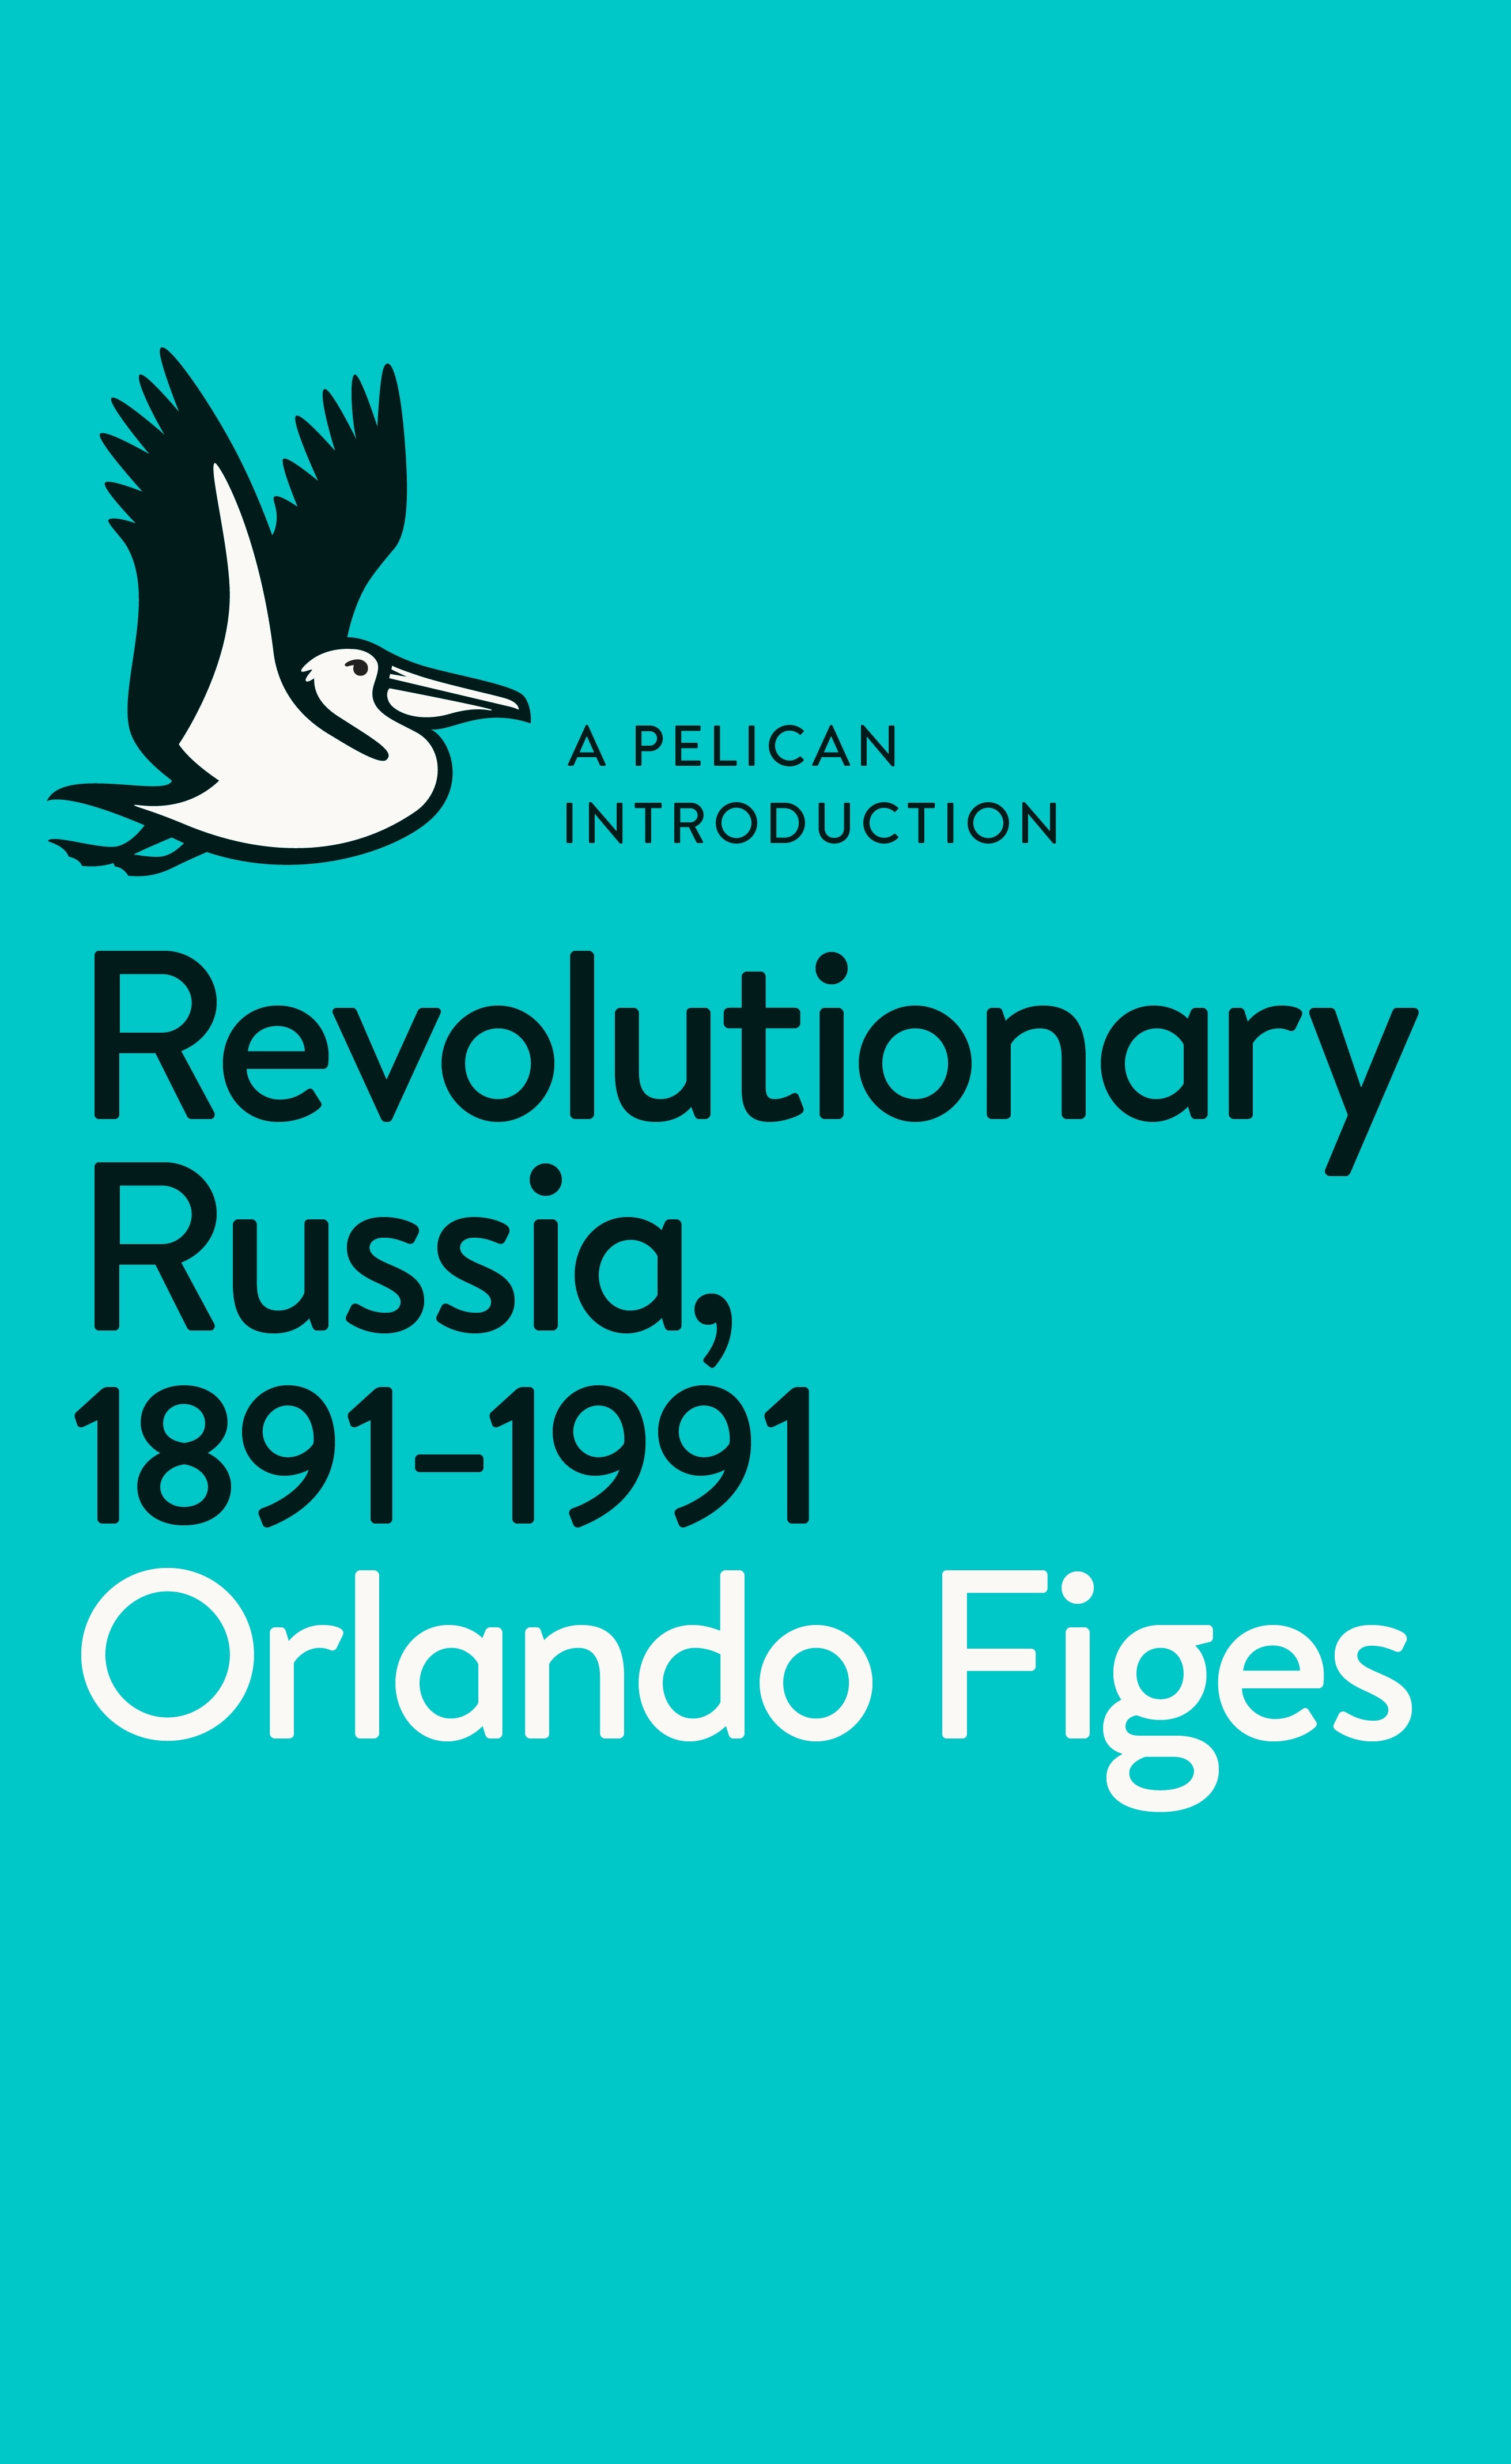 Book “Revolutionary Russia, 1891-1991” by Orlando Figes — May 1, 2014